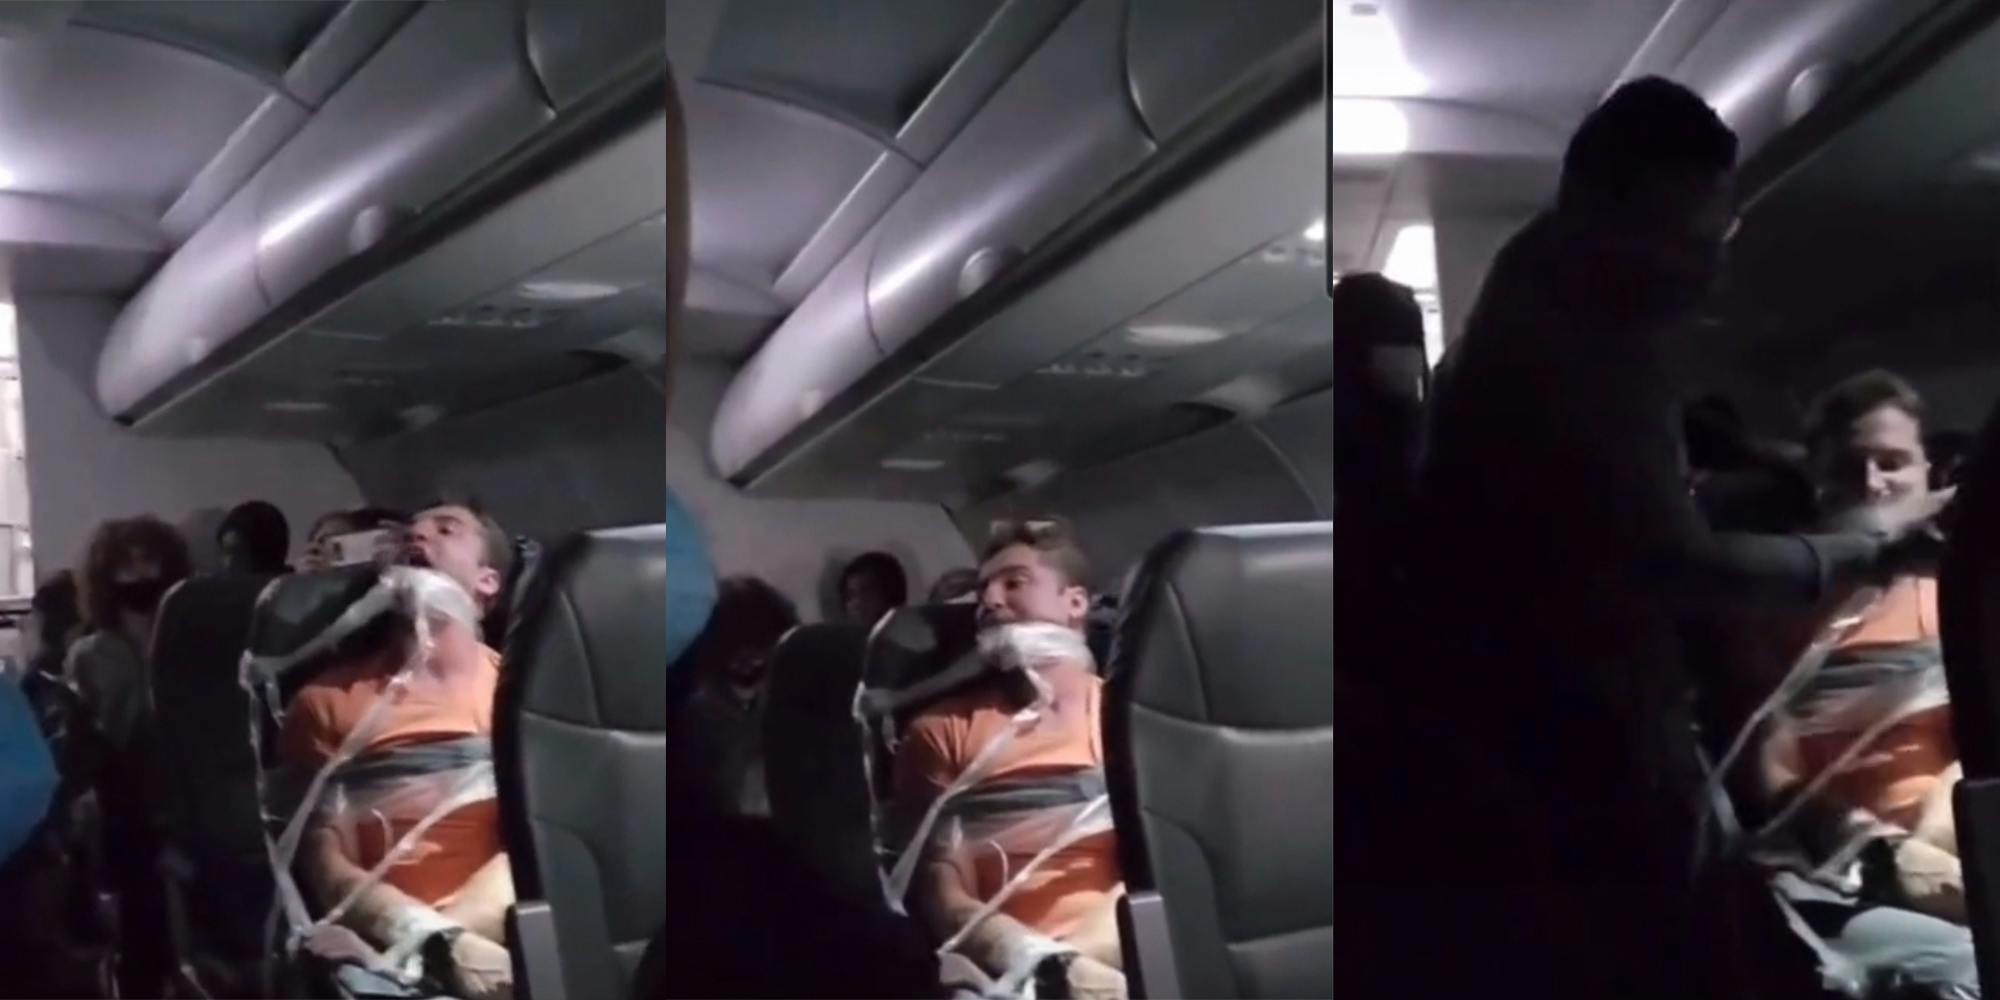 A TikTok shows a passenger restrained on a flight yelling for help.